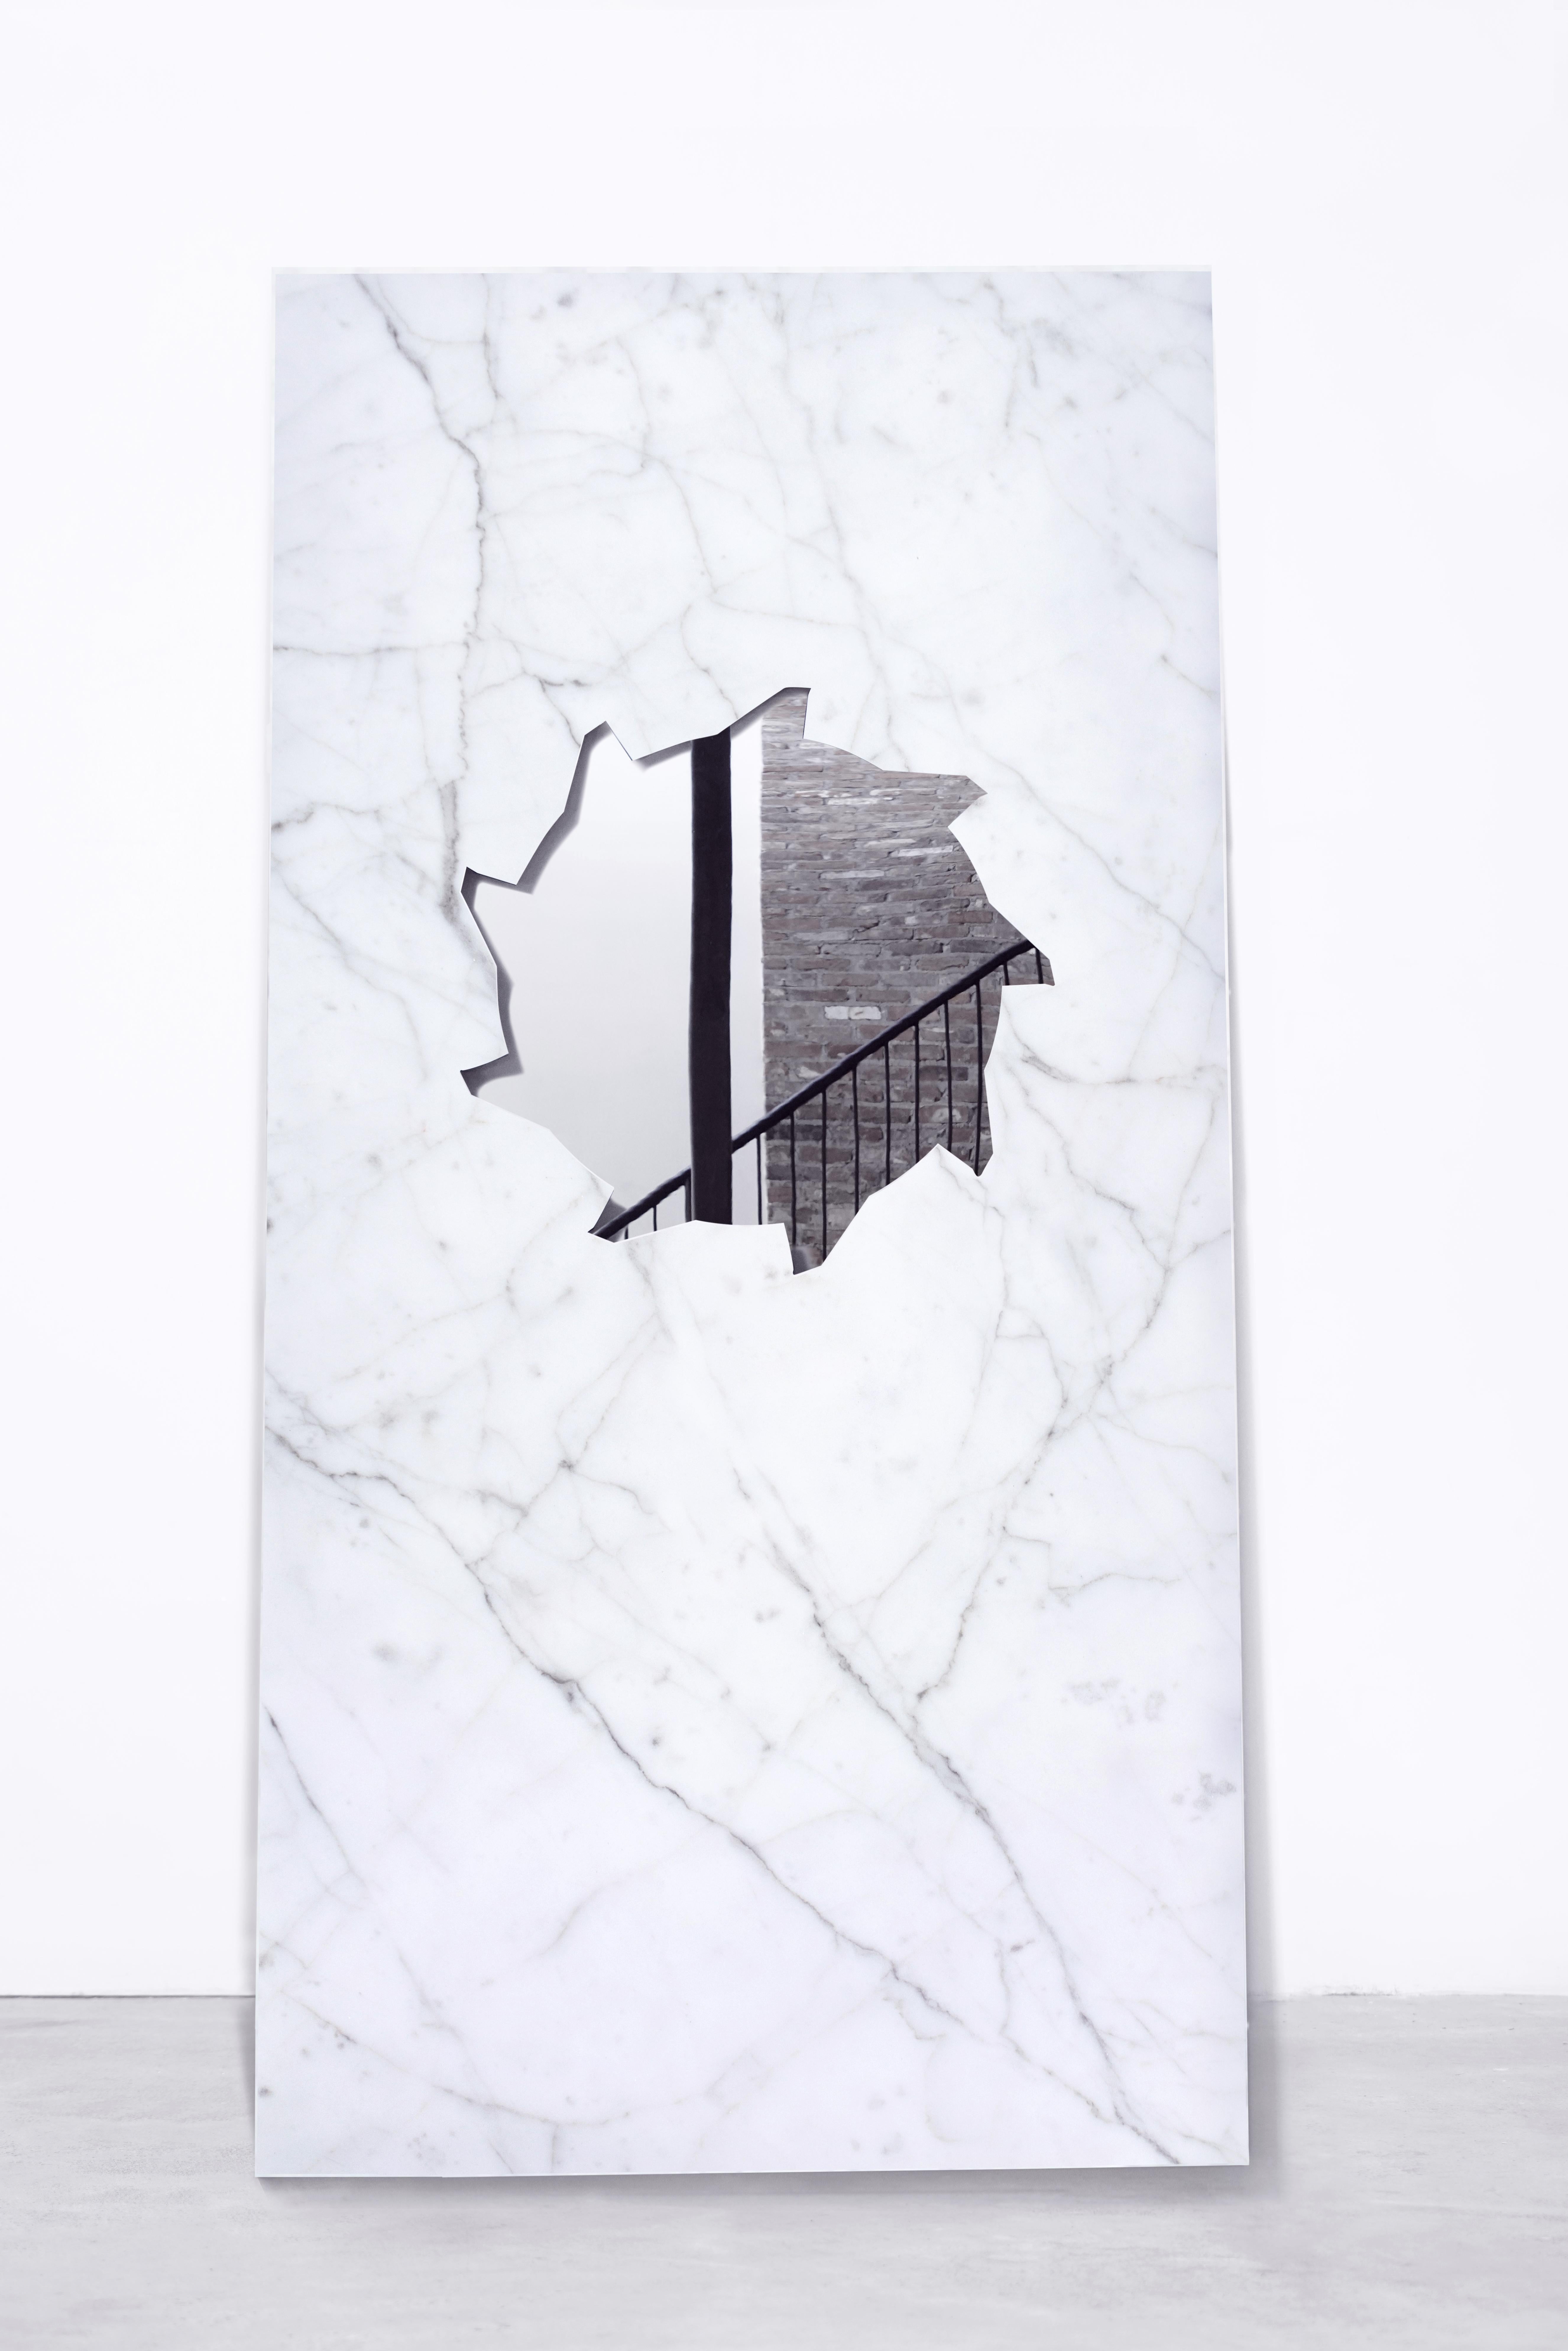 DESCRIPTION
Monumental carrara marble slab with a waterjet cut buzzsaw relief + mirror inlay.
Lean against a sturdy, flat wall.
Made to order in nyc.

DIMENSIONS
Buzzsaw mirror diameter 34.5”
Length 108” 
Width 58” 
Thickness .75”